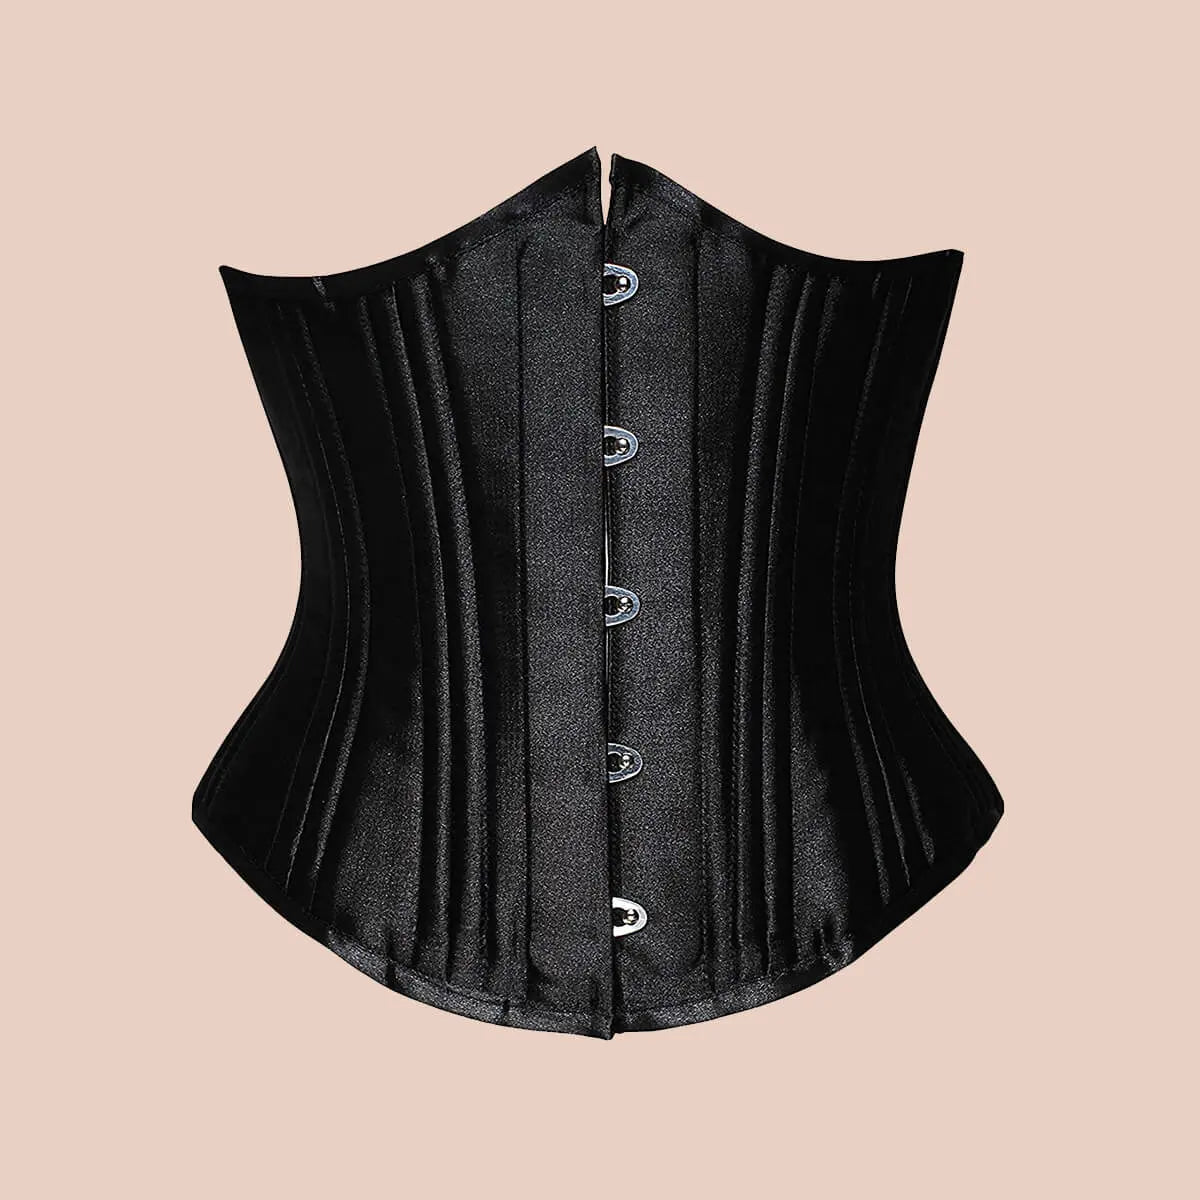 Steel Boned Corset at best price in Gurgaon by Corset Planet